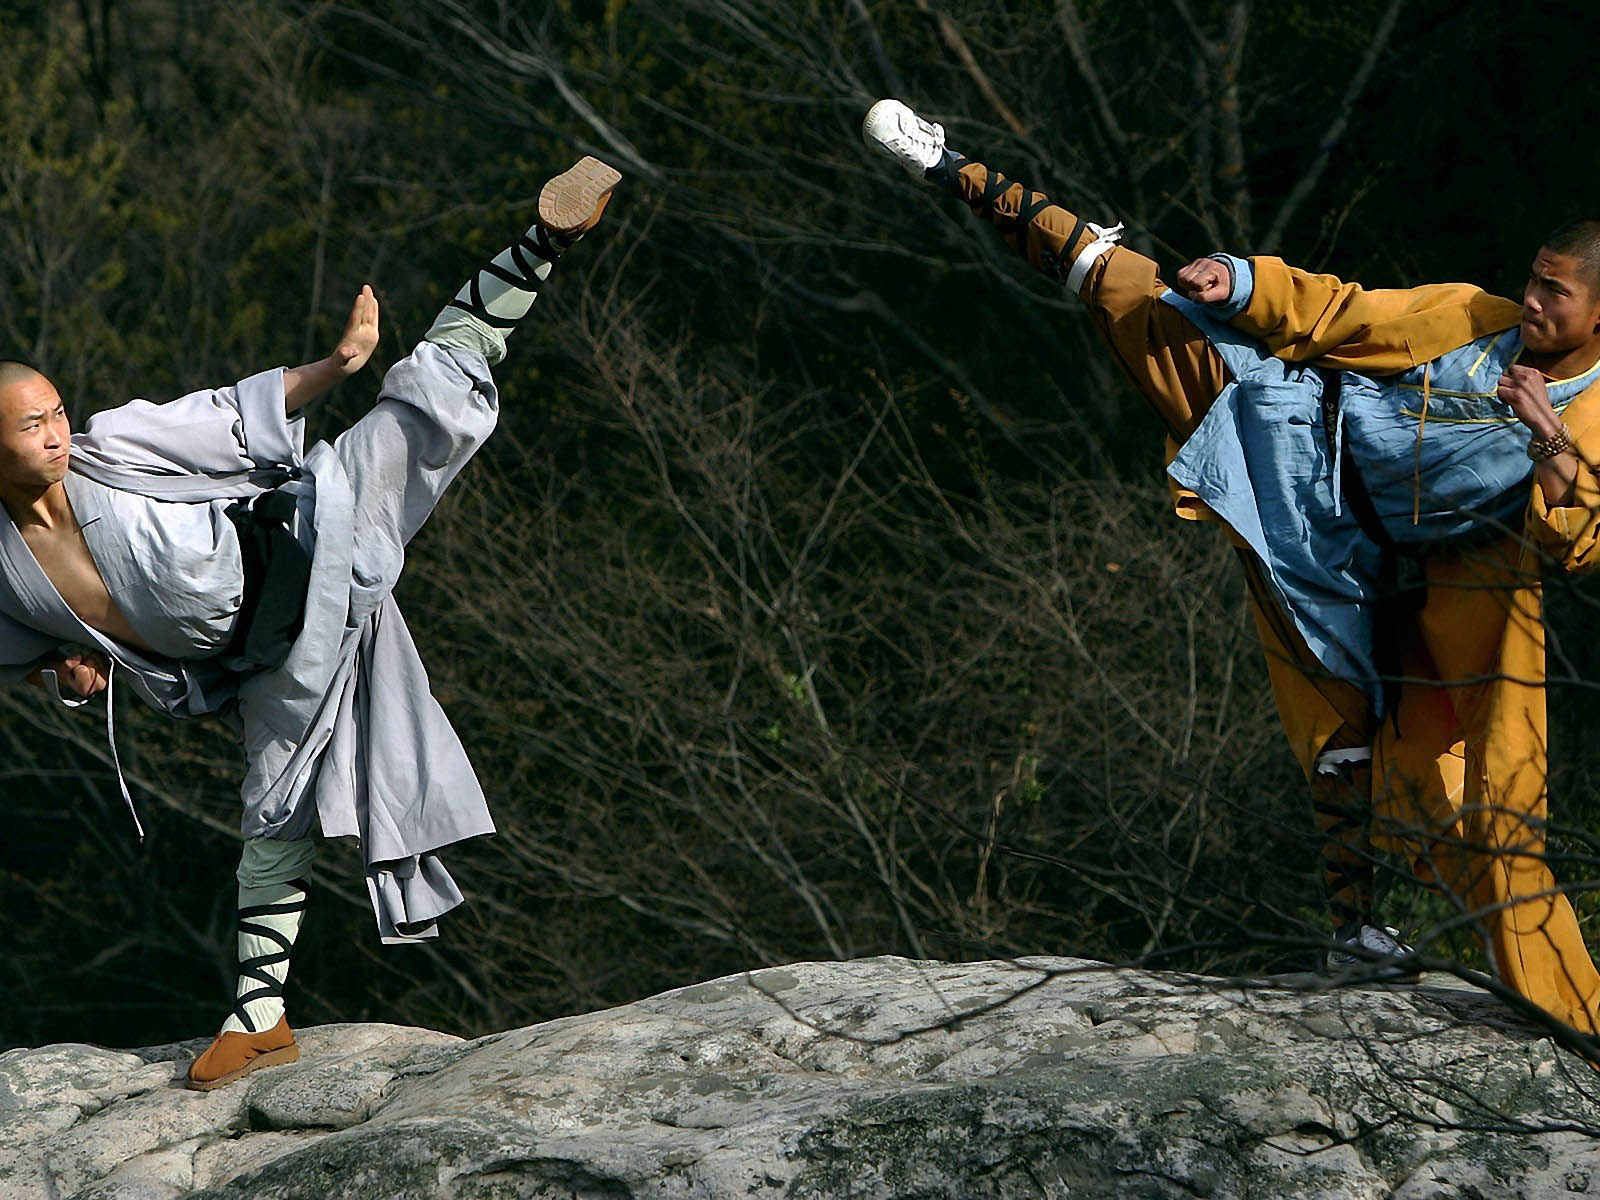 Warrior monks of the Shaolin Temple display their Kung Fu skills at the Songshan Mountain near the temple April 12, 2005 in Dengfeng, Henan Province, China. Shaolin Temple, built in AD 495 in the period of the Northern and Southern Dynasties (420-581) and located in the Songshan Mountain area, is the birthplace of Shaolin Kung Fu. Shaolin Kung Fu, with its incredible strength, vitality and flexibility, is expecting to be included in the UNESCO intangible heritage list.